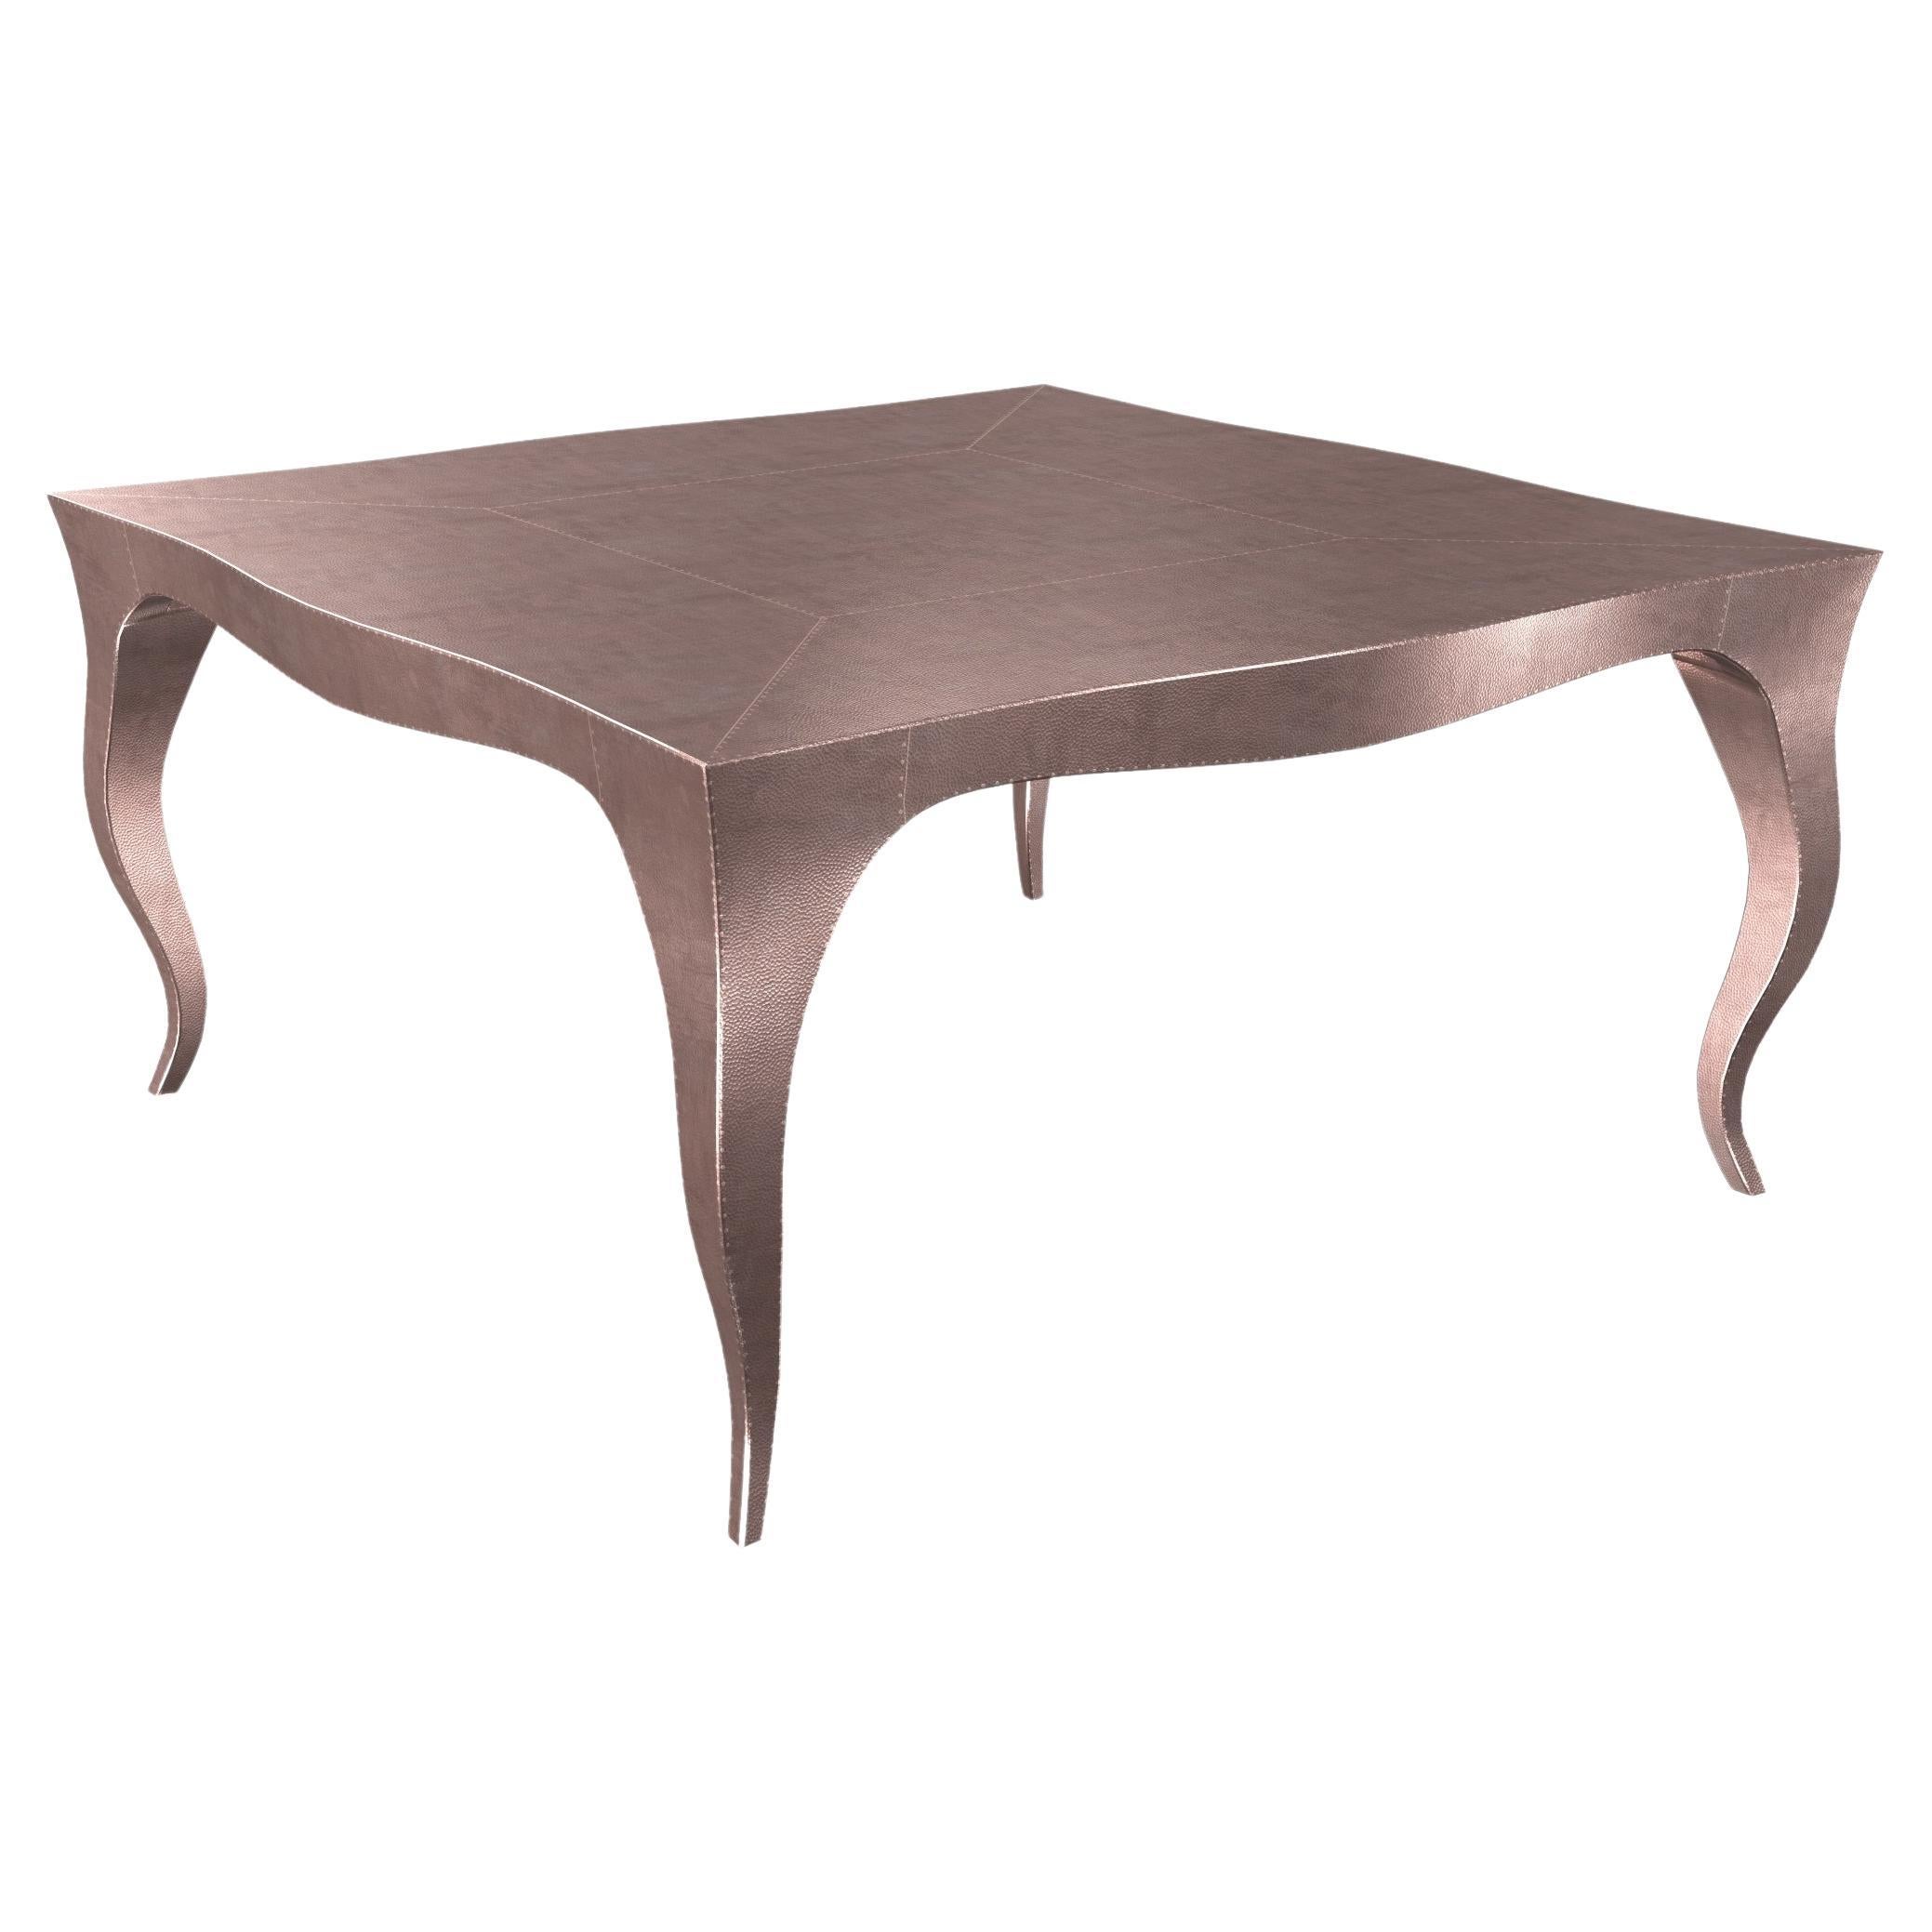 Louise Art Deco Card Tables and Tea Tables Mid. Hammered Copper by Paul Mathieu For Sale